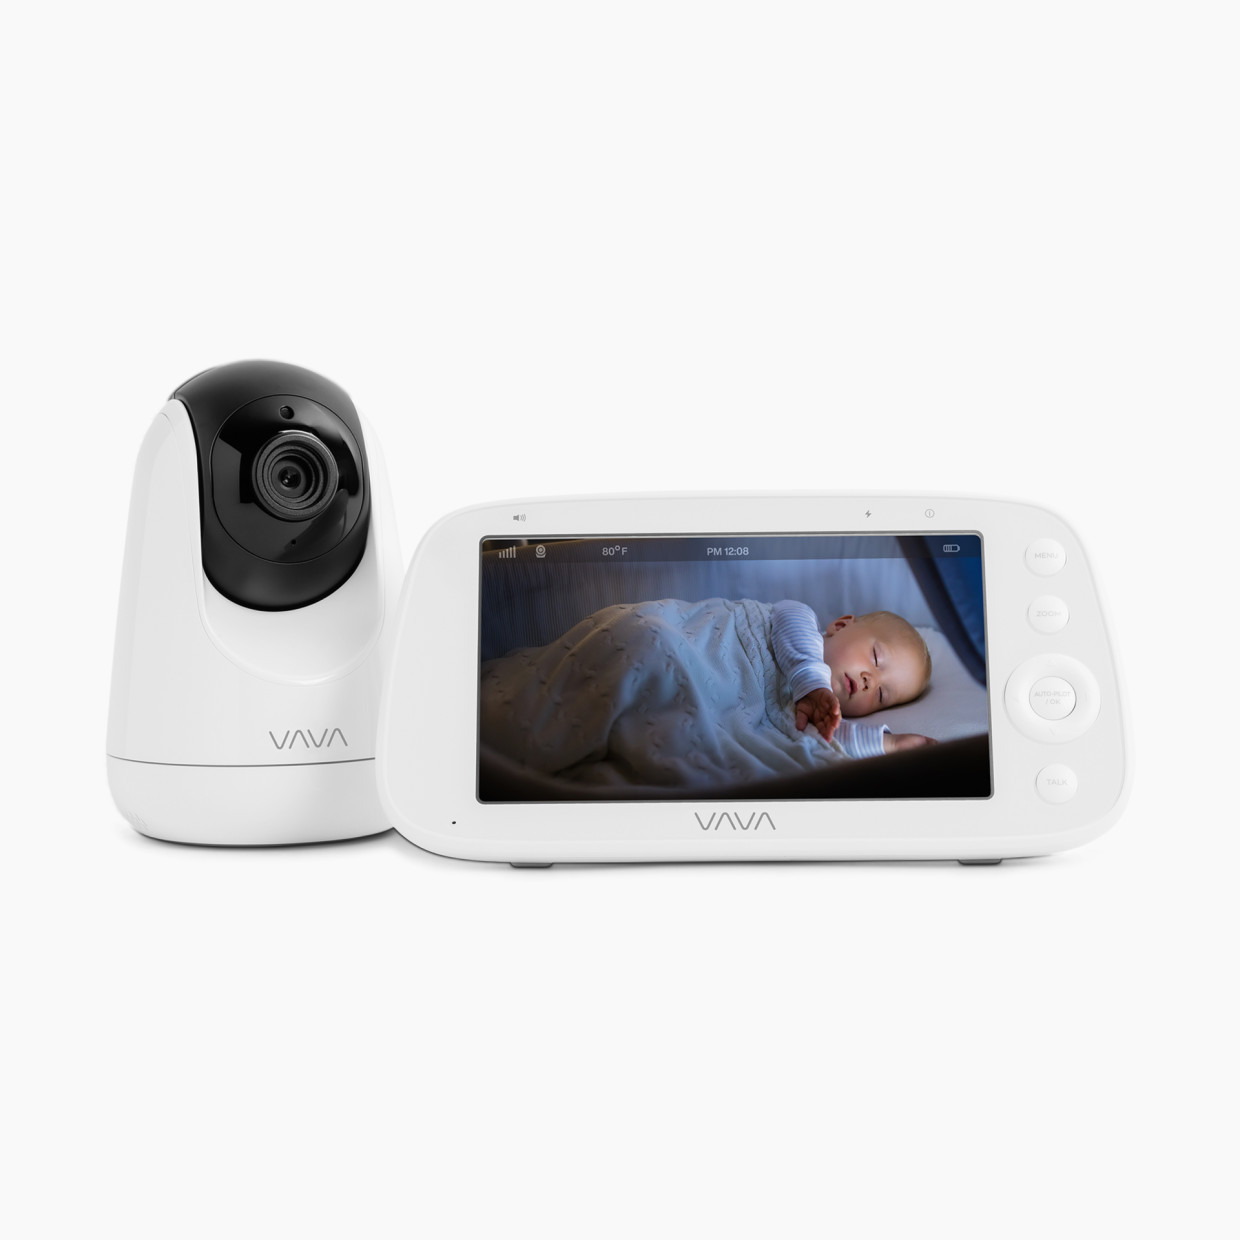 VAVA Baby Monitor - Video with 1080P 5.5" HD Display.